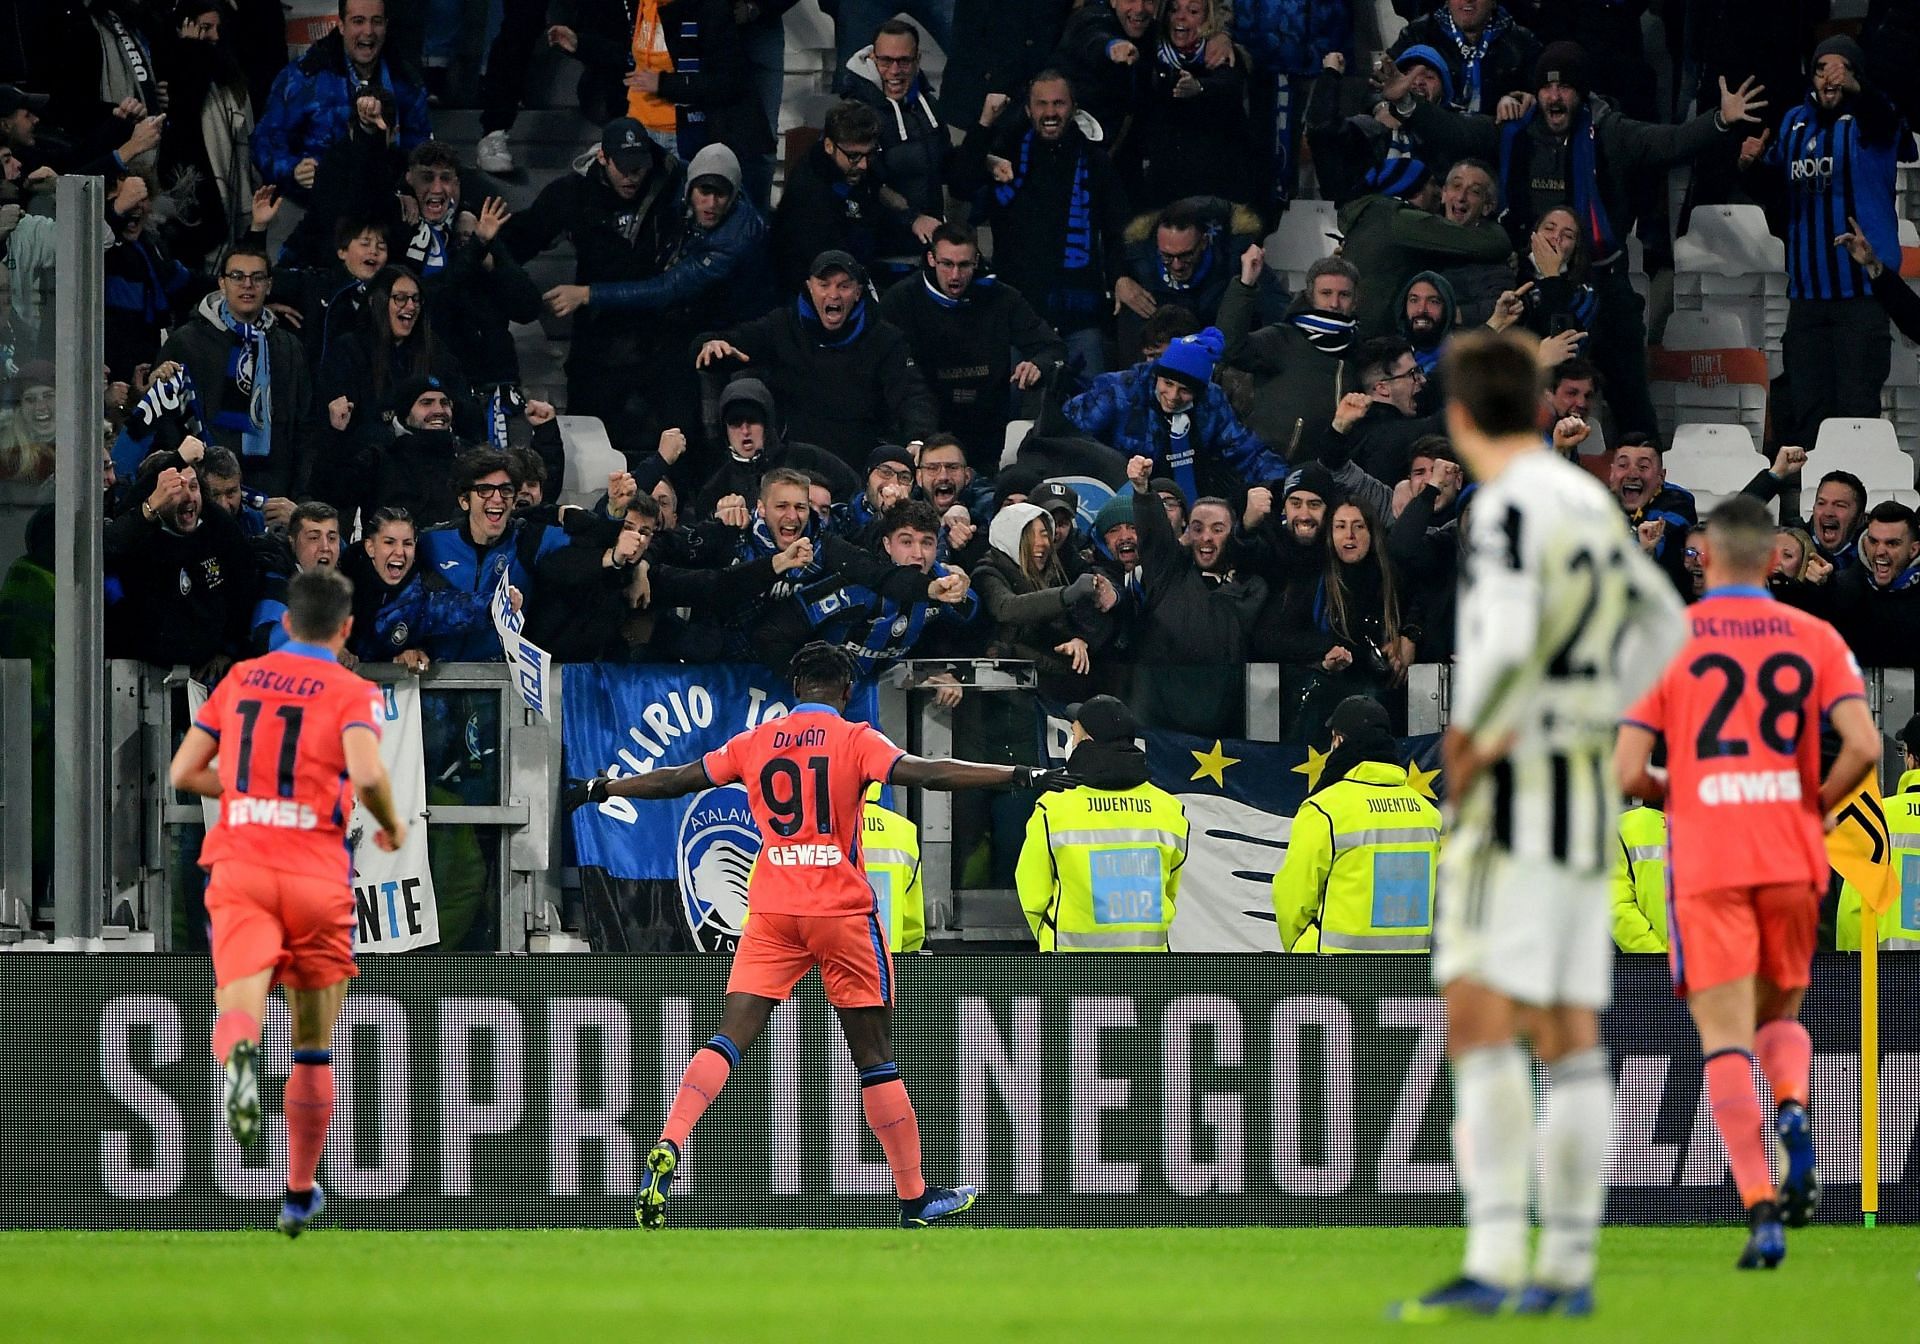 Juventus have now lost back to back matches after losing to Atalanta